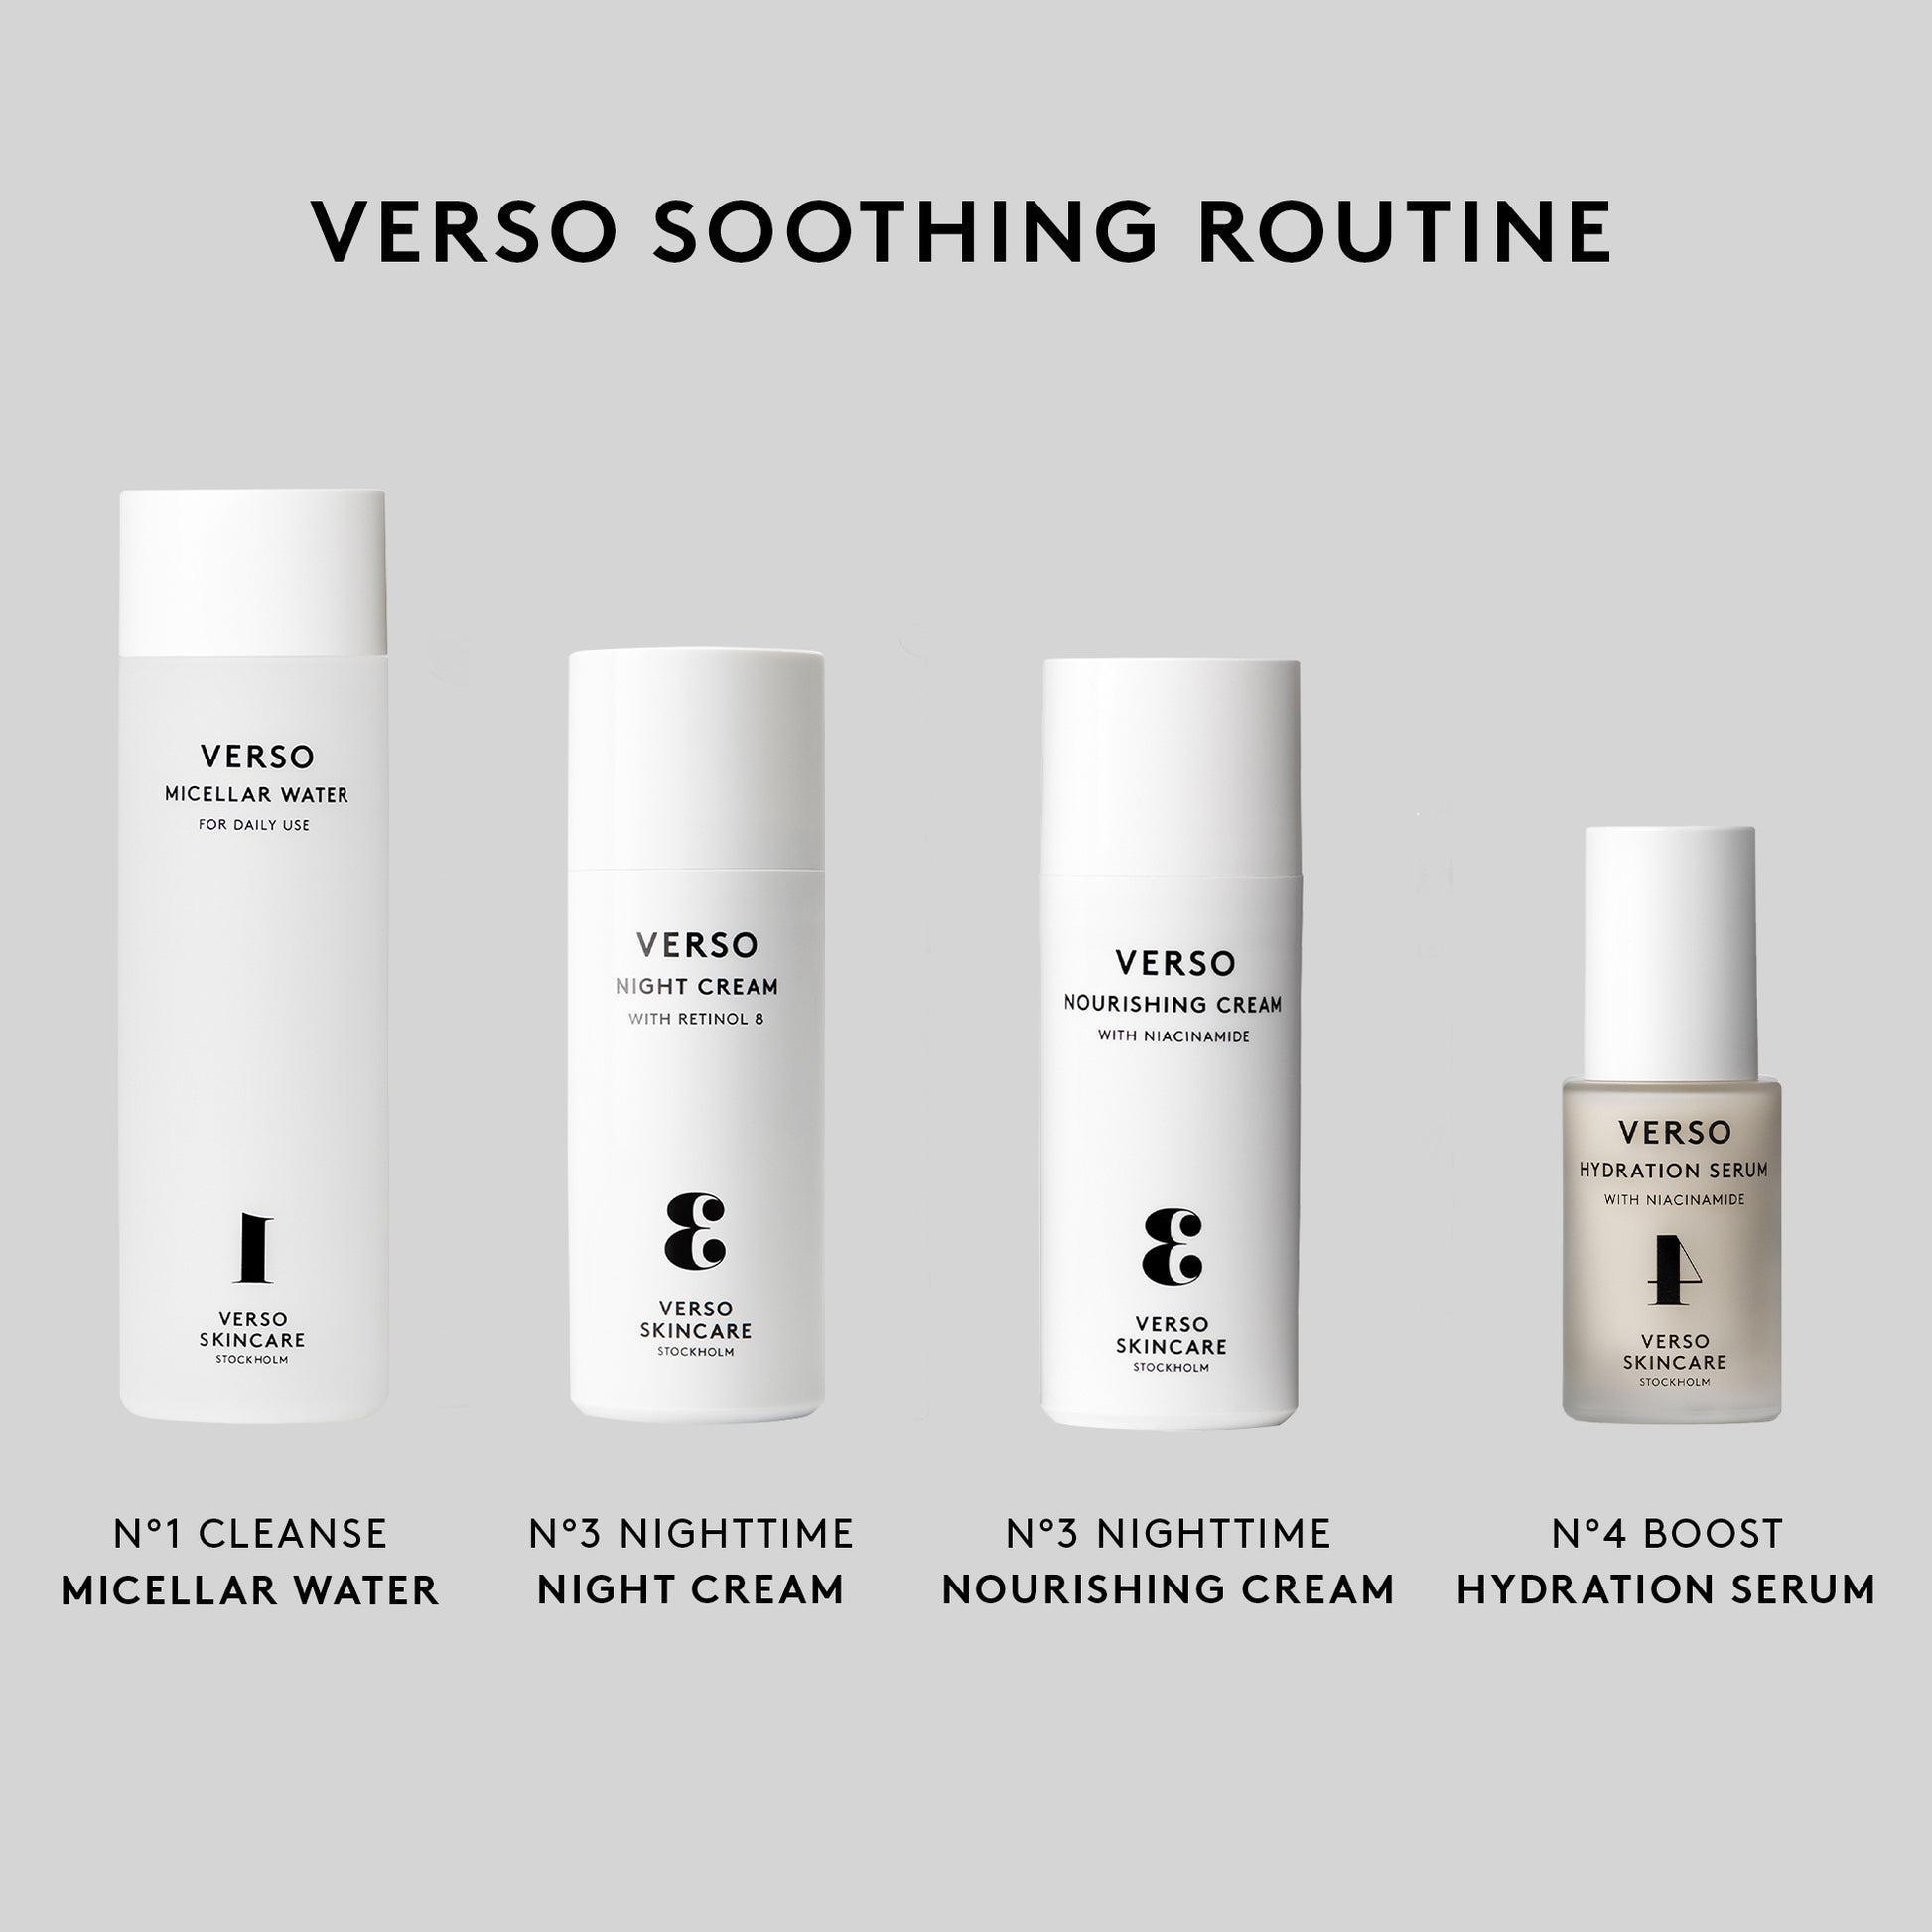 Verso Night Cream: Verso Night Cream visibly improves the appearance of calm and rejuvenated skin. Formulated to leave your skin visibly softer while reducing the look of premature aging. The perfect way to introduce your skin to Retinol 8.